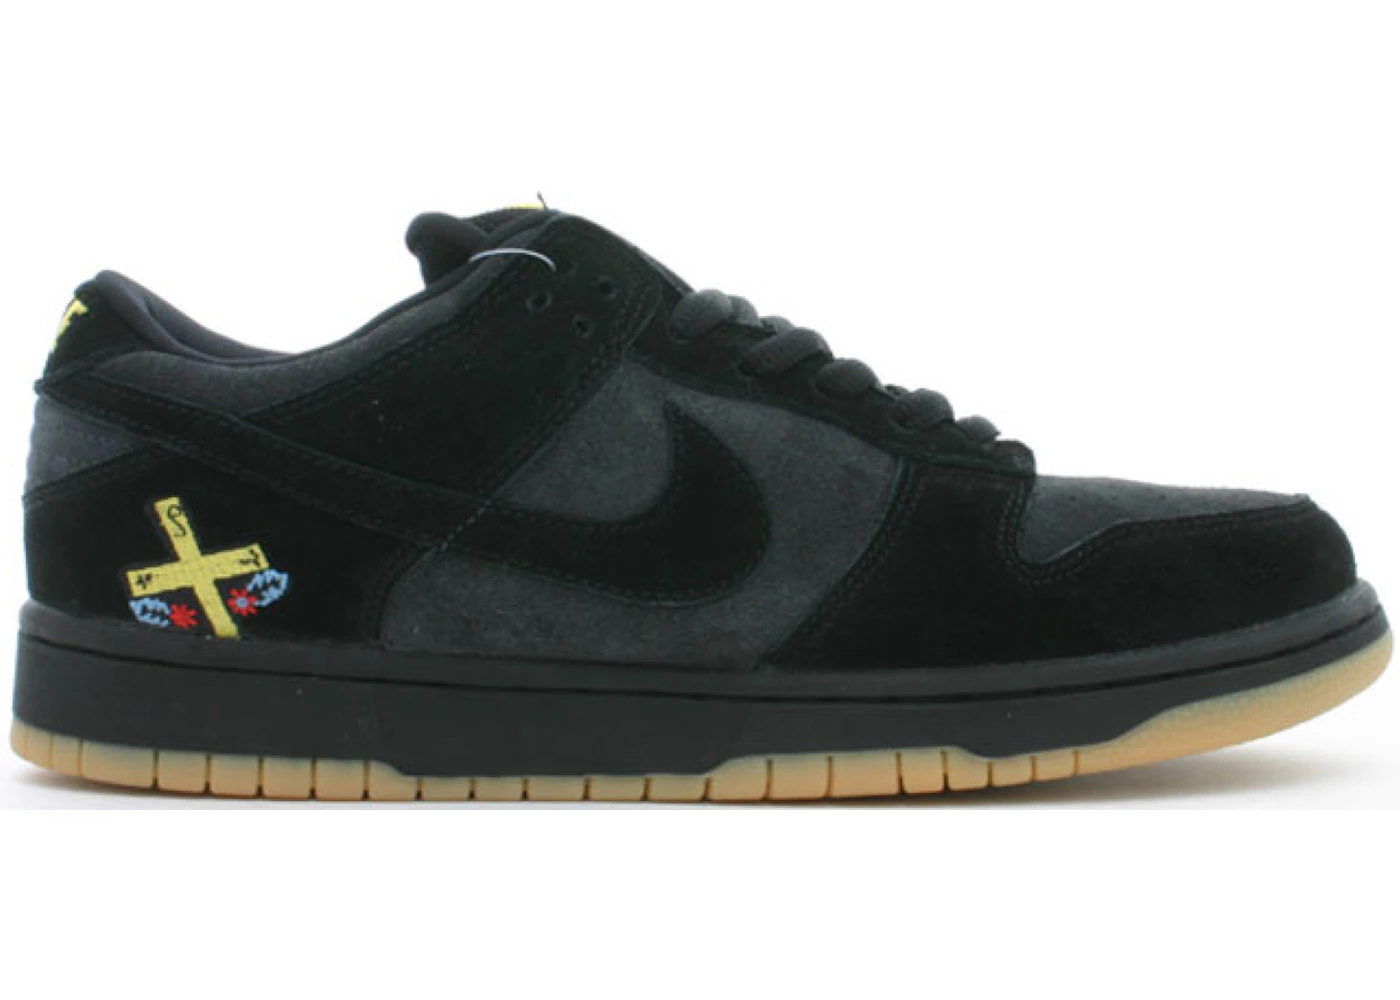 Nike Dunk Low SP Chocolate - 305162-001 - US